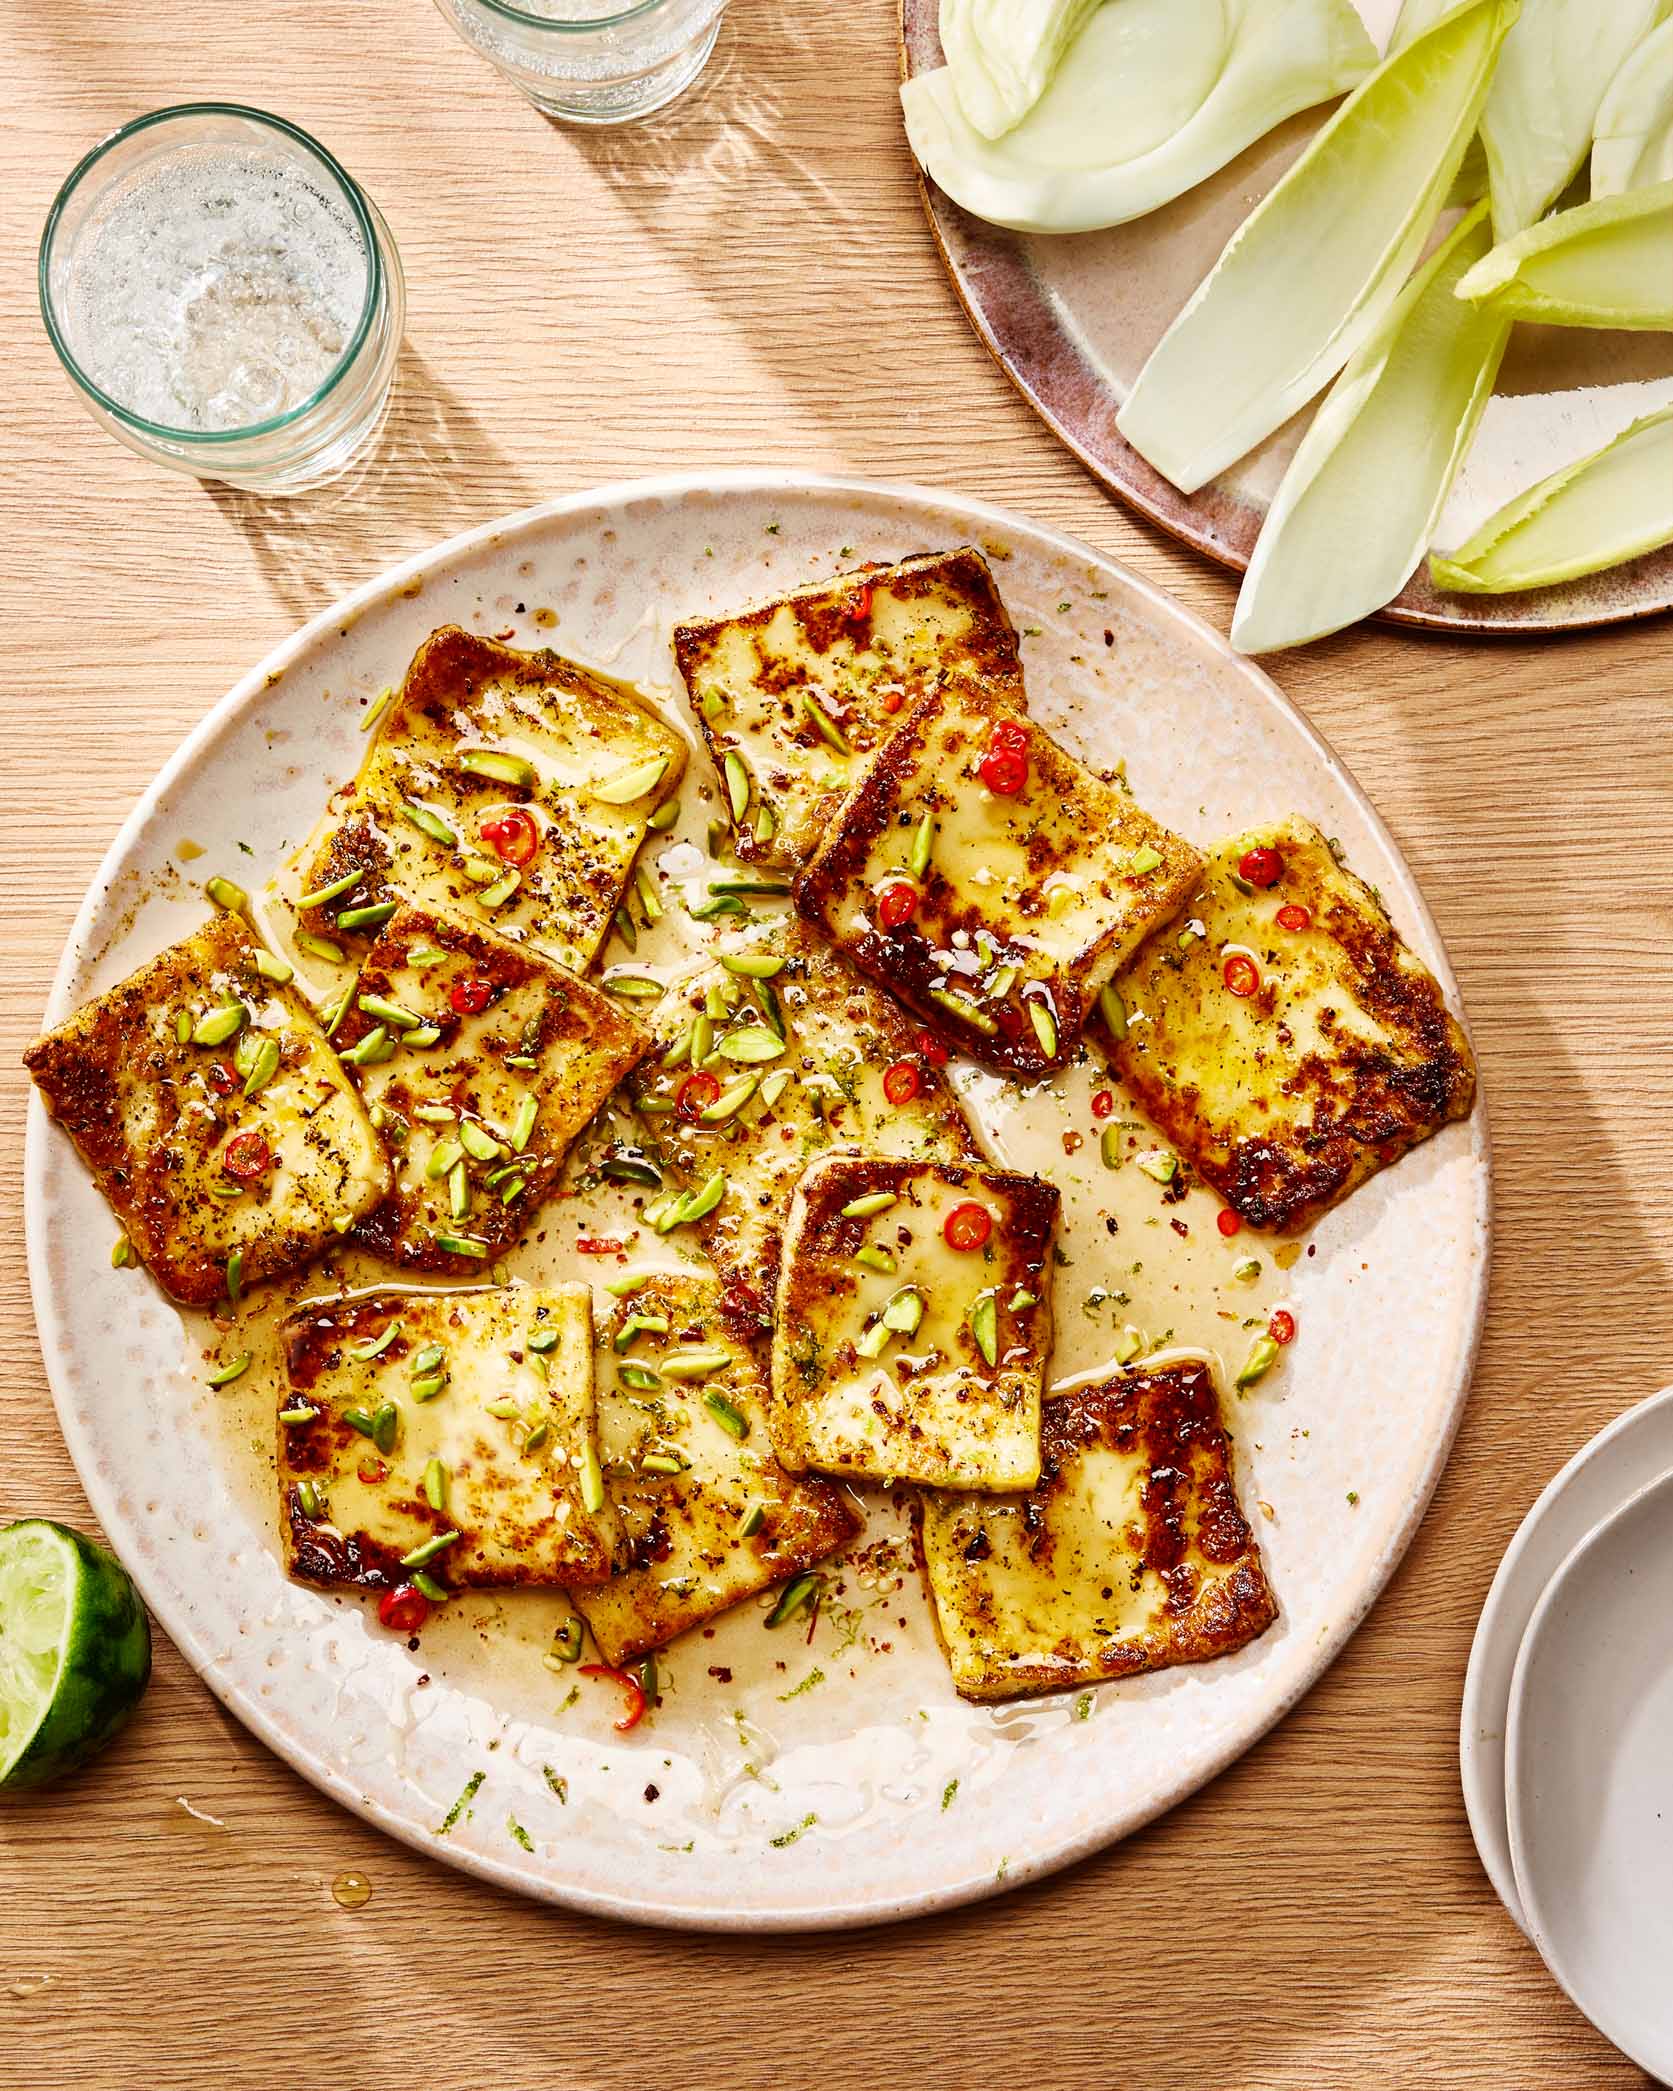 Harissa-Rubbed Halloumi with Hot Honey and Lime by Casa de Suna